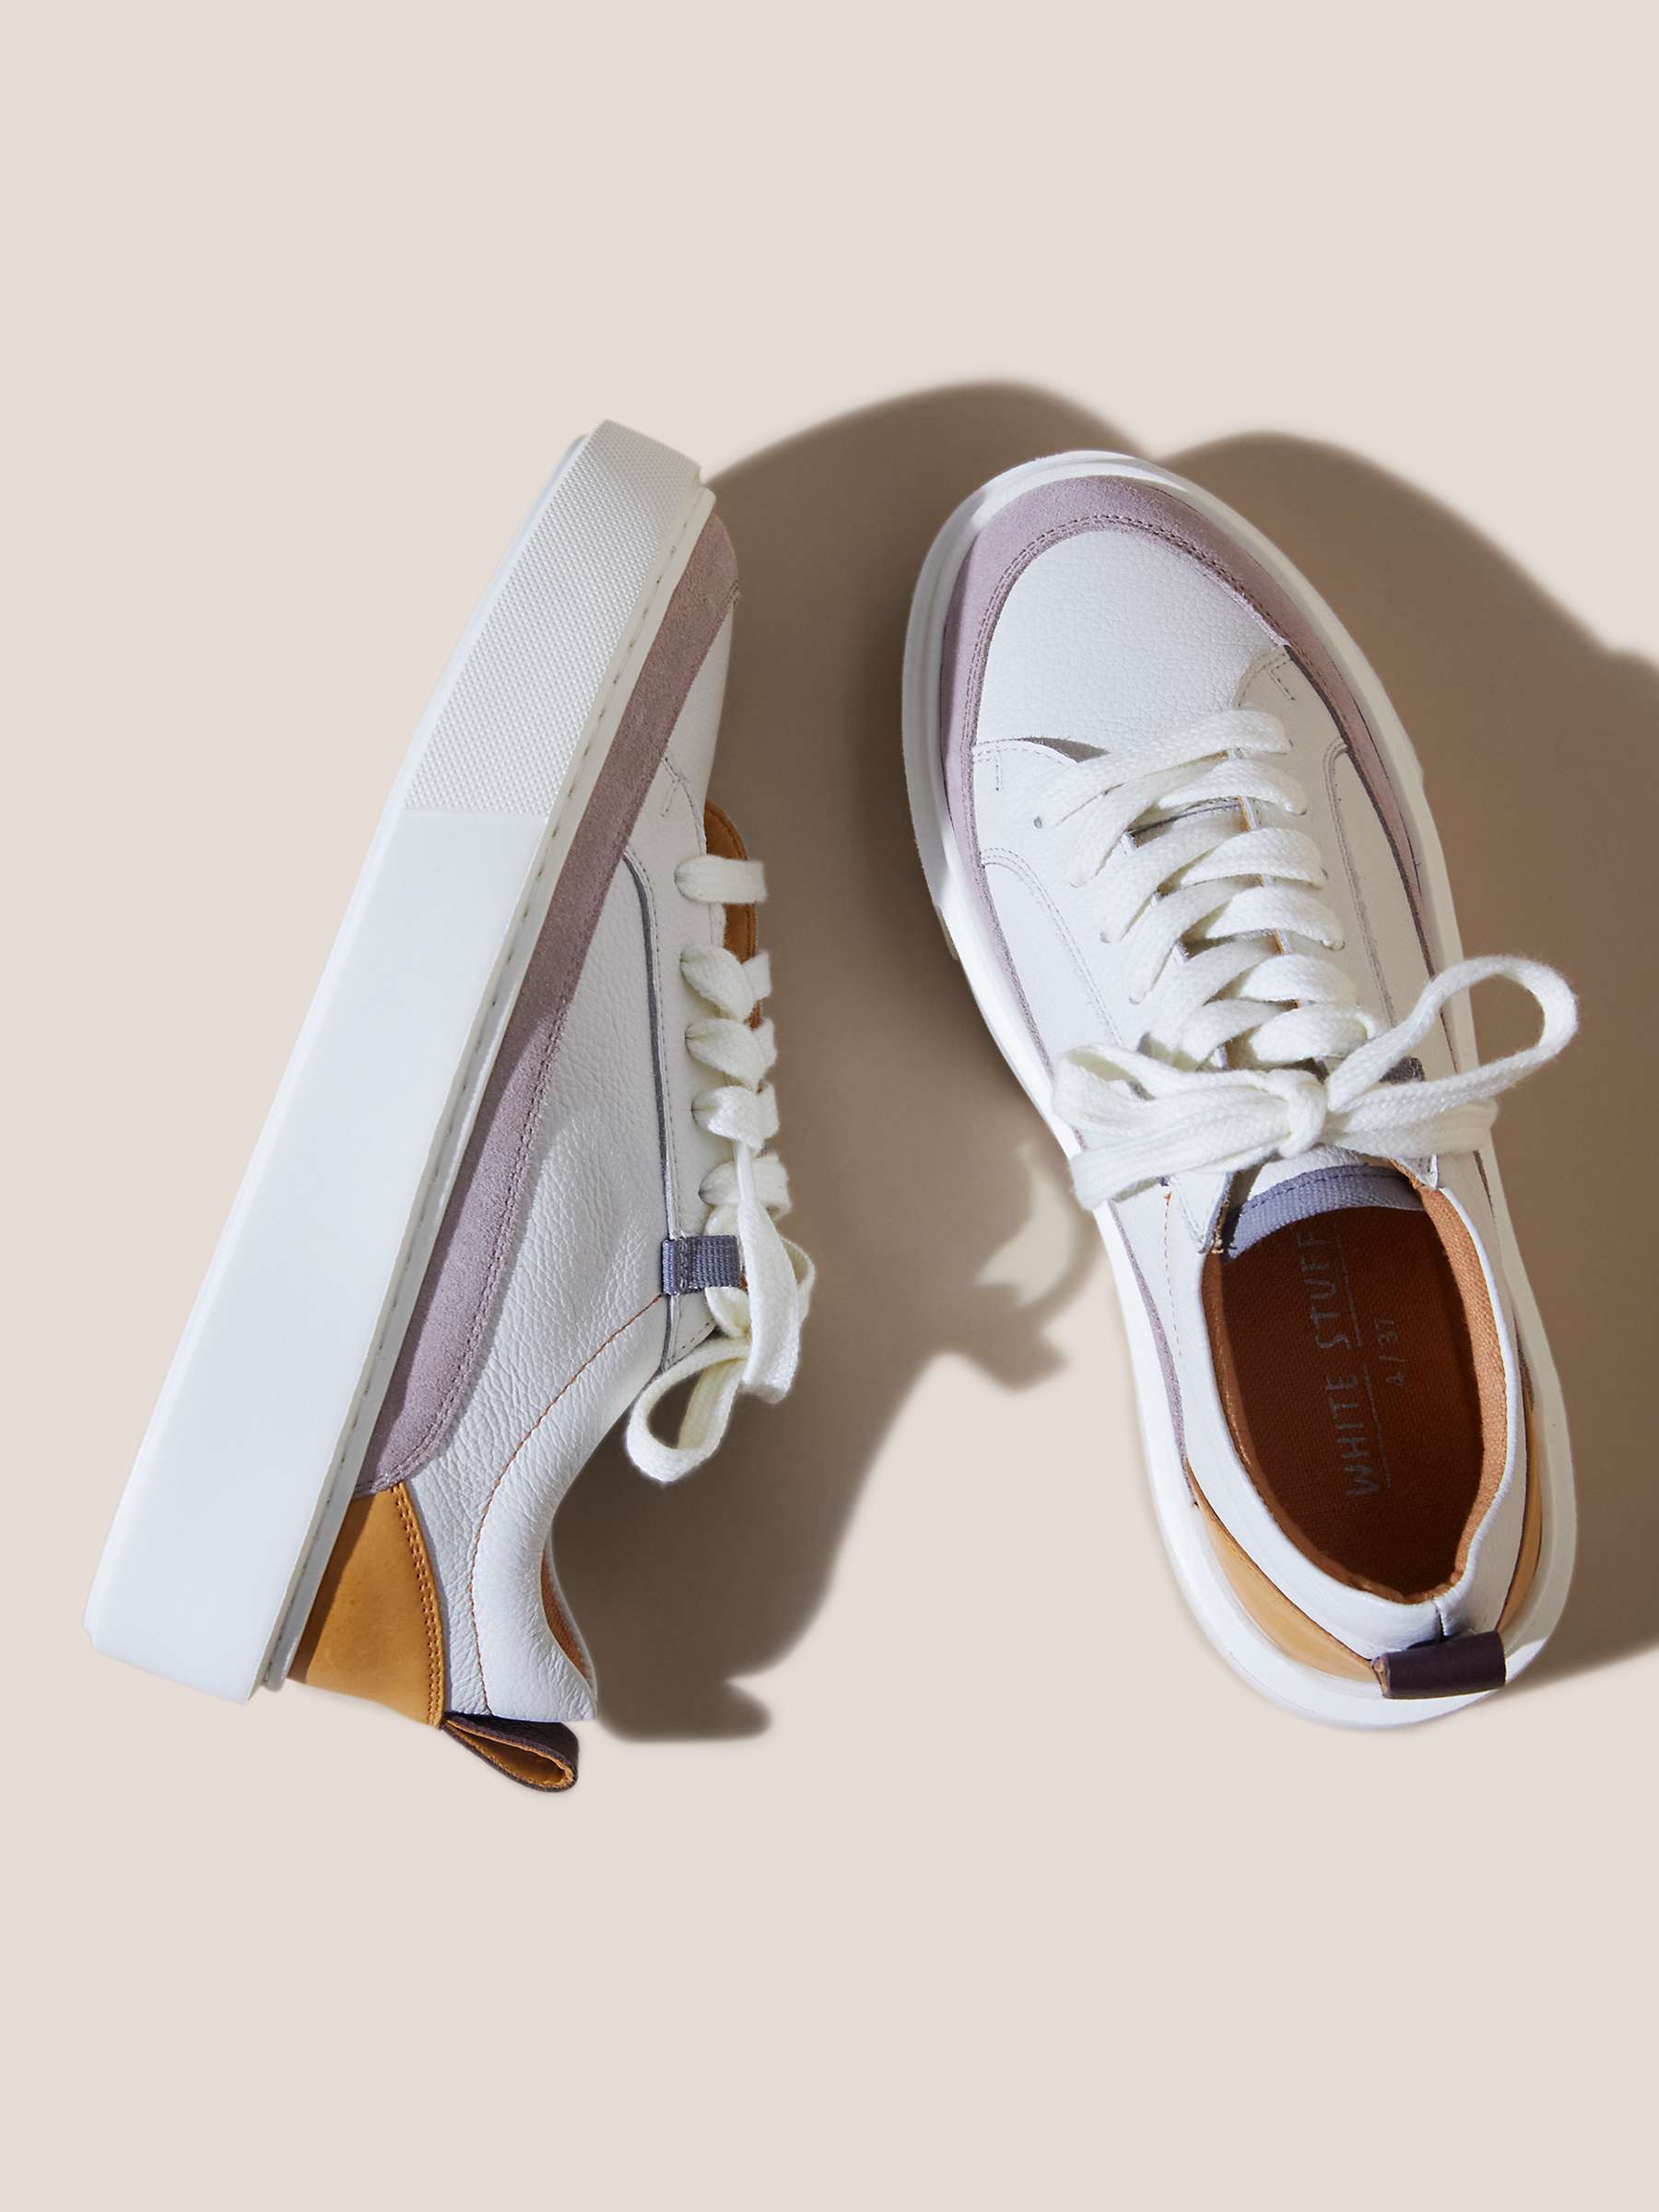 Buy White Stuff Leather Trainers, White/Multi Online at johnlewis.com